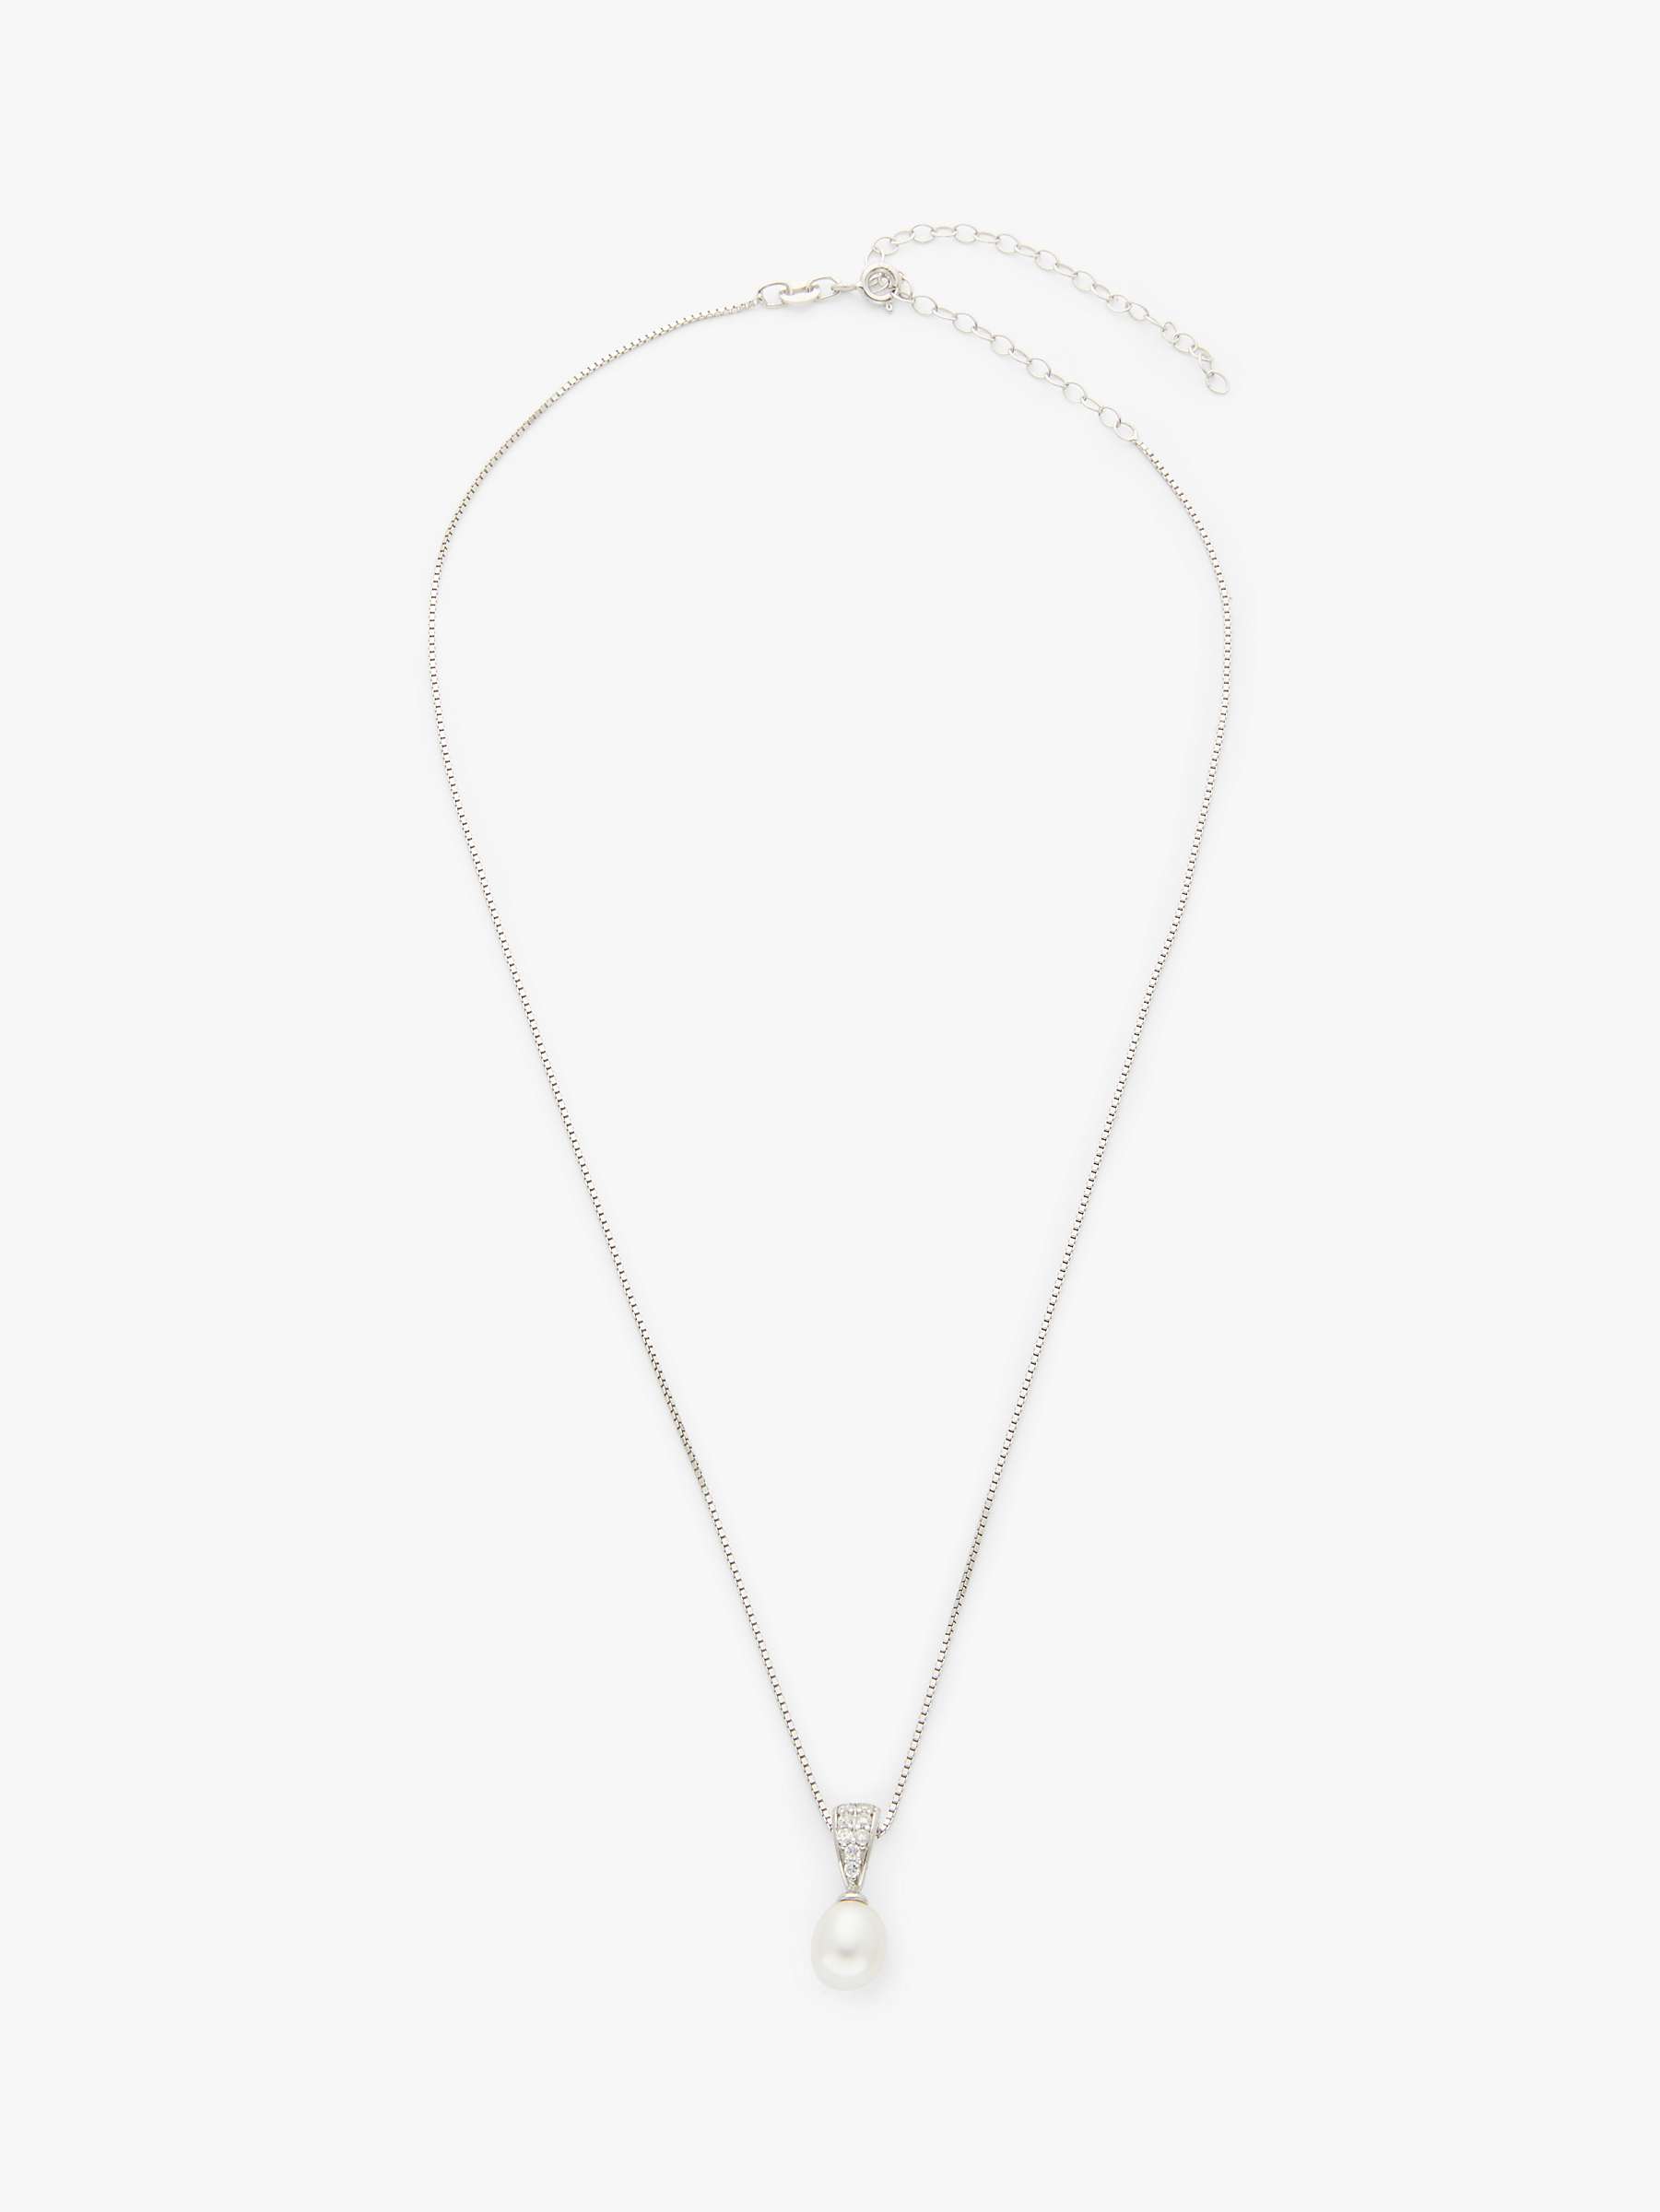 Buy Lido Pearls Triangular Cubic Zirconia and Freshwater Pearl Pendant Necklace, Silver/White Online at johnlewis.com